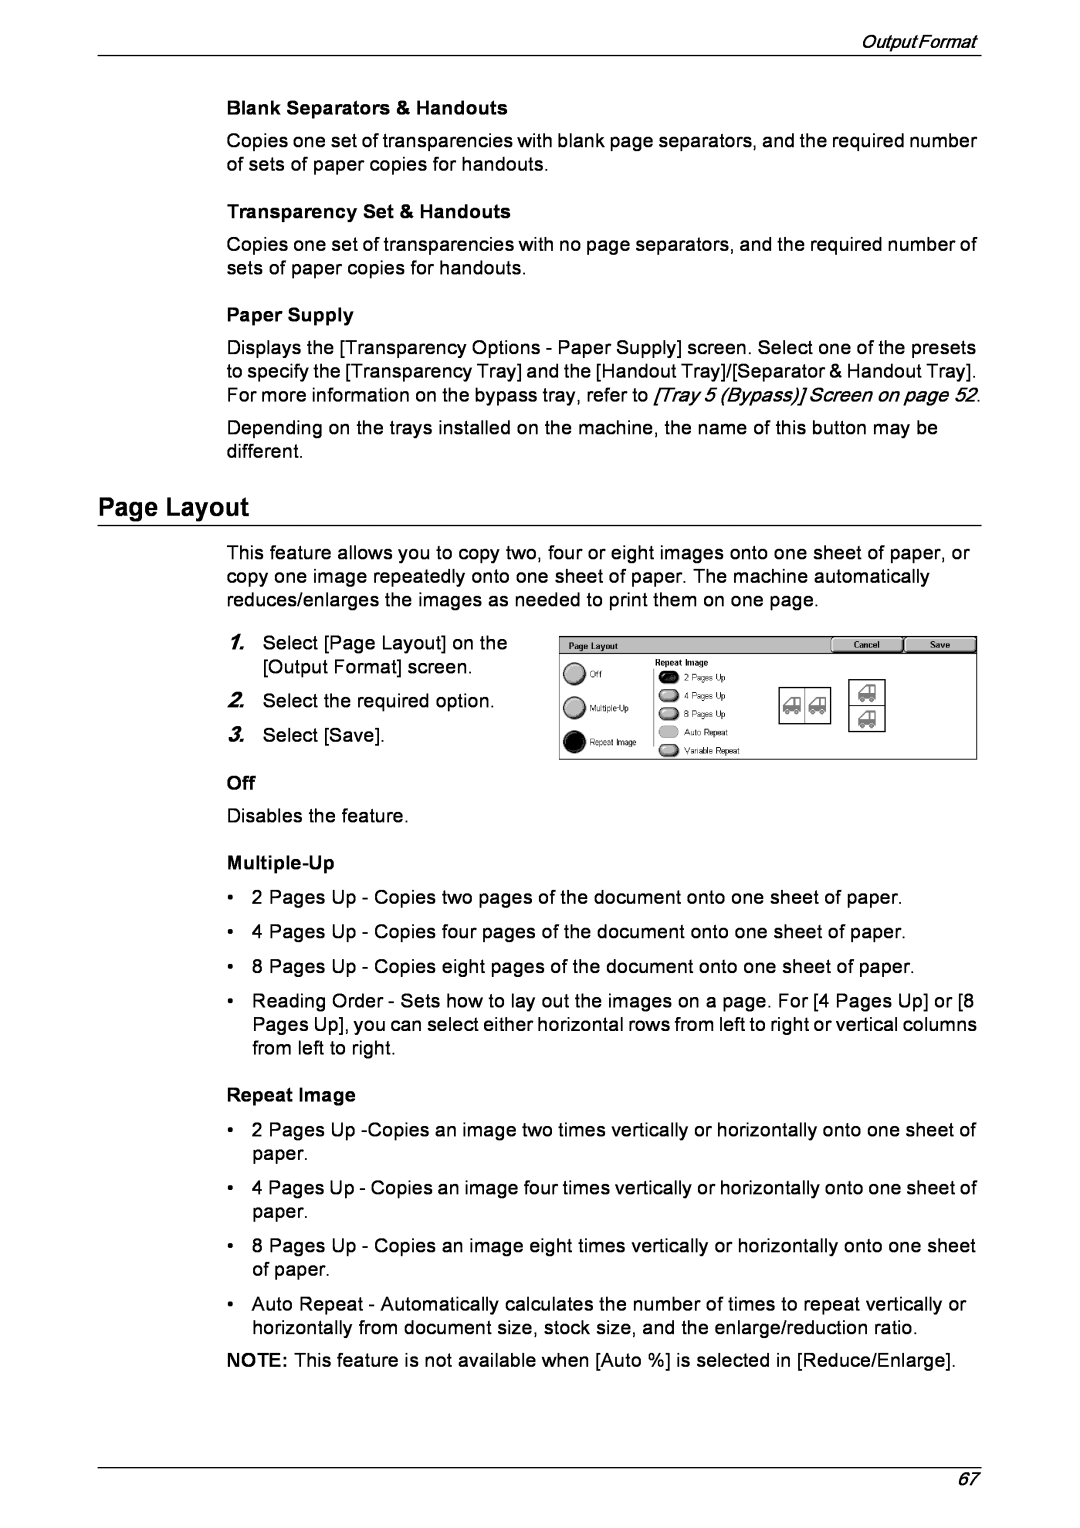 Xerox 5230 Page Layout, Blank Separators & Handouts, Transparency Set & Handouts, Multiple-Up, Repeat Image, Paper Supply 